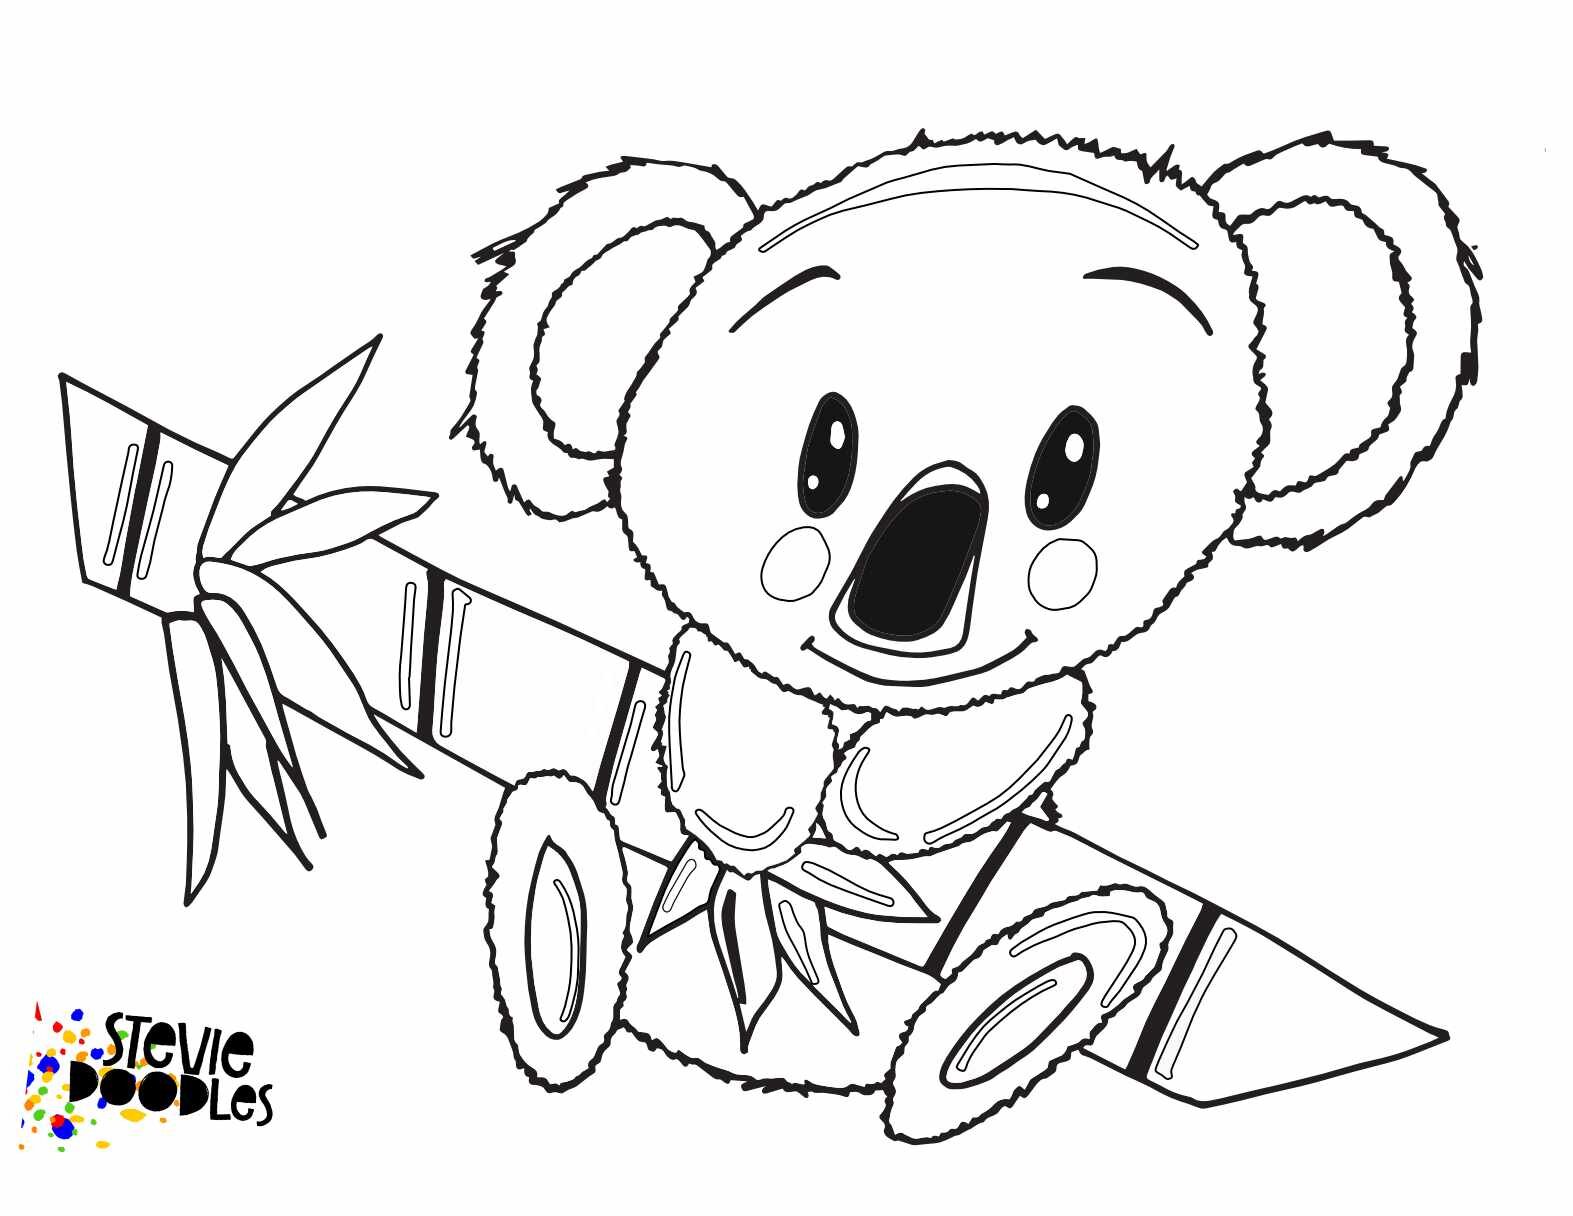 Free Little Koala Coloring Page CLICK HERE TO DOWNLOAD THE PAGE ABOVE